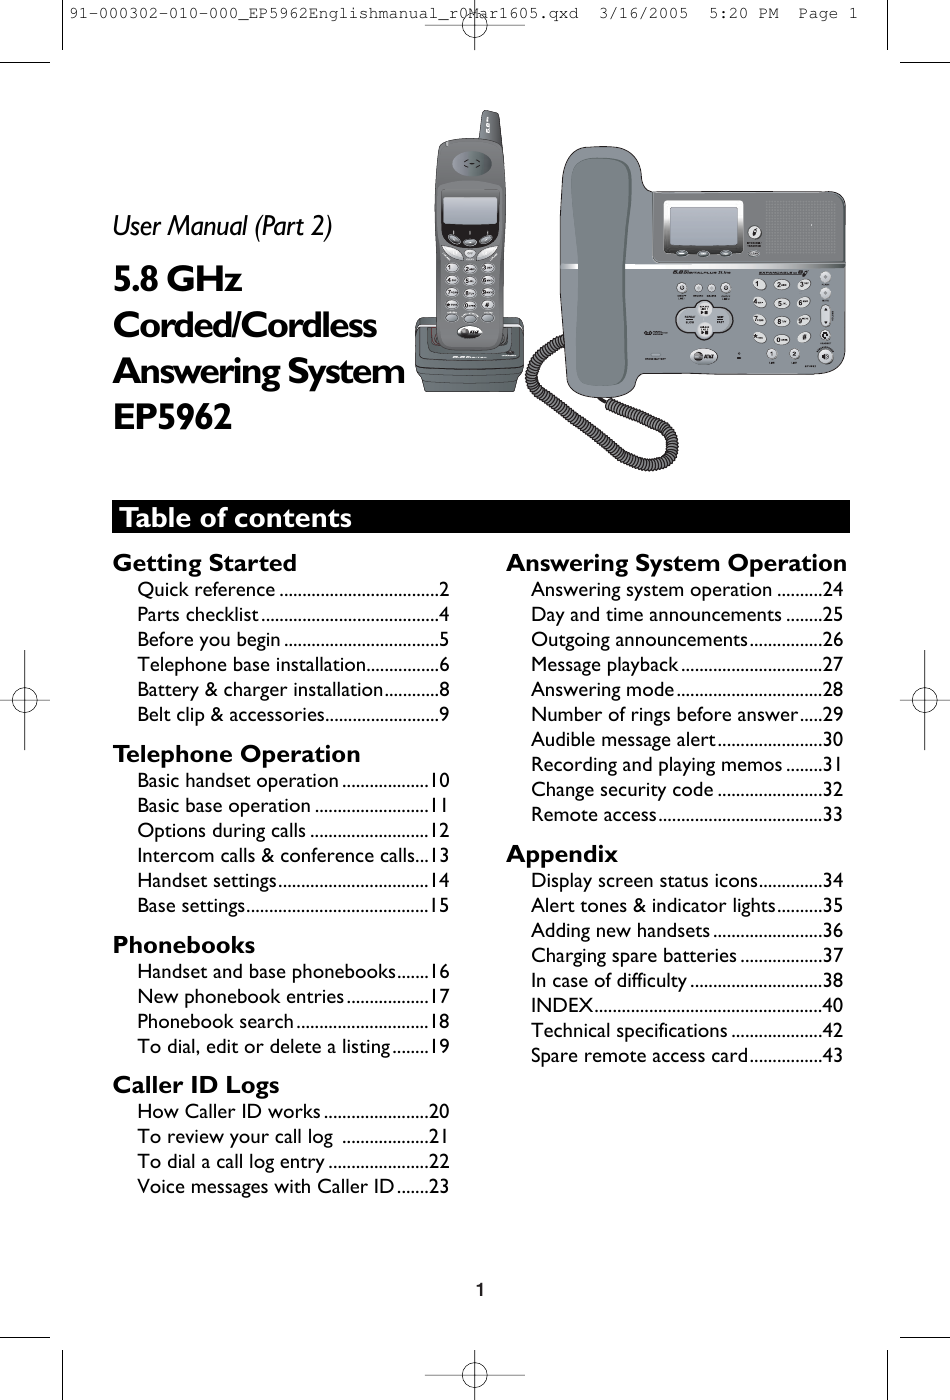 1Table of contentsUser Manual (Part 2)5.8 GHzCorded/Cordless Answering SystemEP5962Getting StartedQuick reference ...................................2Parts checklist .......................................4Before you begin ..................................5Telephone base installation................6Battery &amp; charger installation............8Belt clip &amp; accessories.........................9Telephone OperationBasic handset operation ...................10Basic base operation .........................11Options during calls ..........................12Intercom calls &amp; conference calls...13Handset settings.................................14Base settings........................................15PhonebooksHandset and base phonebooks.......16New phonebook entries..................17Phonebook search.............................18To dial, edit or delete a listing........19Caller ID LogsHow Caller ID works .......................20To review your call log  ...................21To dial a call log entry ......................22Voice messages with Caller ID.......23Answering System OperationAnswering system operation ..........24Day and time announcements ........25Outgoing announcements................26Message playback ...............................27Answering mode................................28Number of rings before answer.....29Audible message alert.......................30Recording and playing memos ........31Change security code .......................32Remote access....................................33AppendixDisplay screen status icons..............34Alert tones &amp; indicator lights..........35Adding new handsets ........................36Charging spare batteries ..................37In case of difficulty .............................38INDEX..................................................40Technical specifications ....................42Spare remote access card................43 91-000302-010-000_EP5962Englishmanual_r0Mar1605.qxd  3/16/2005  5:20 PM  Page 1